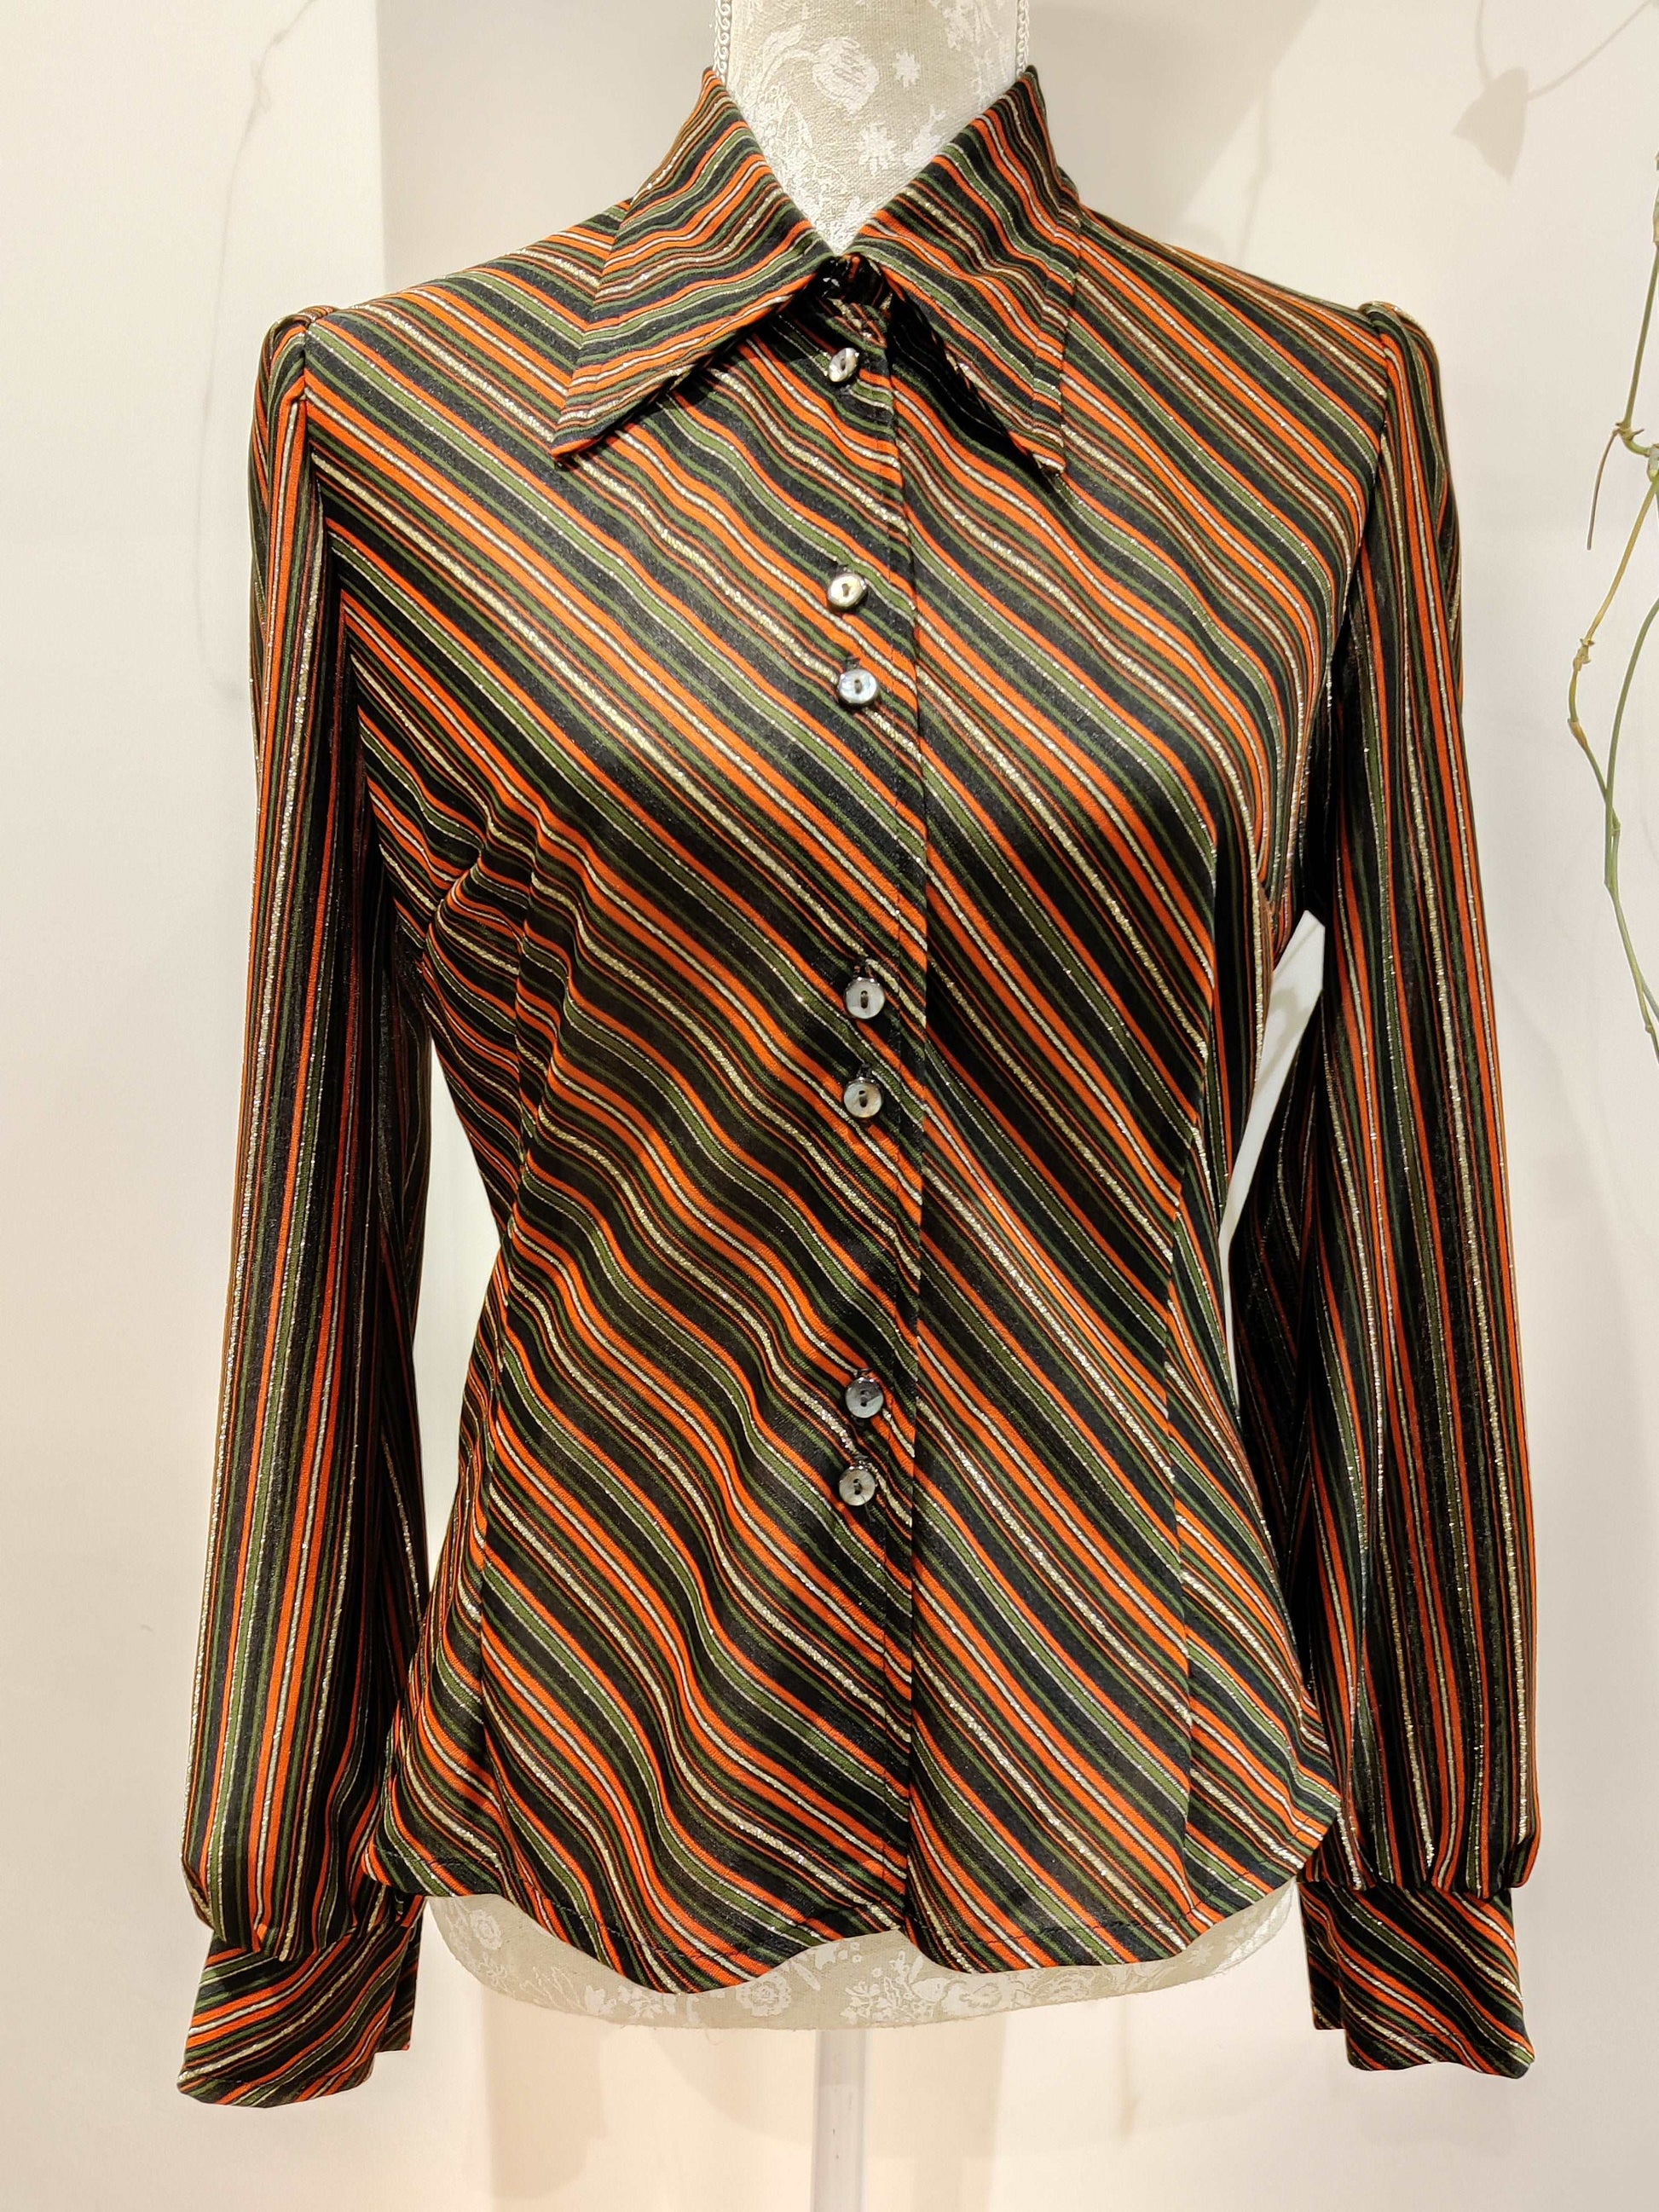 Stunning red, green and gold lurex shirt with dagger collar. 